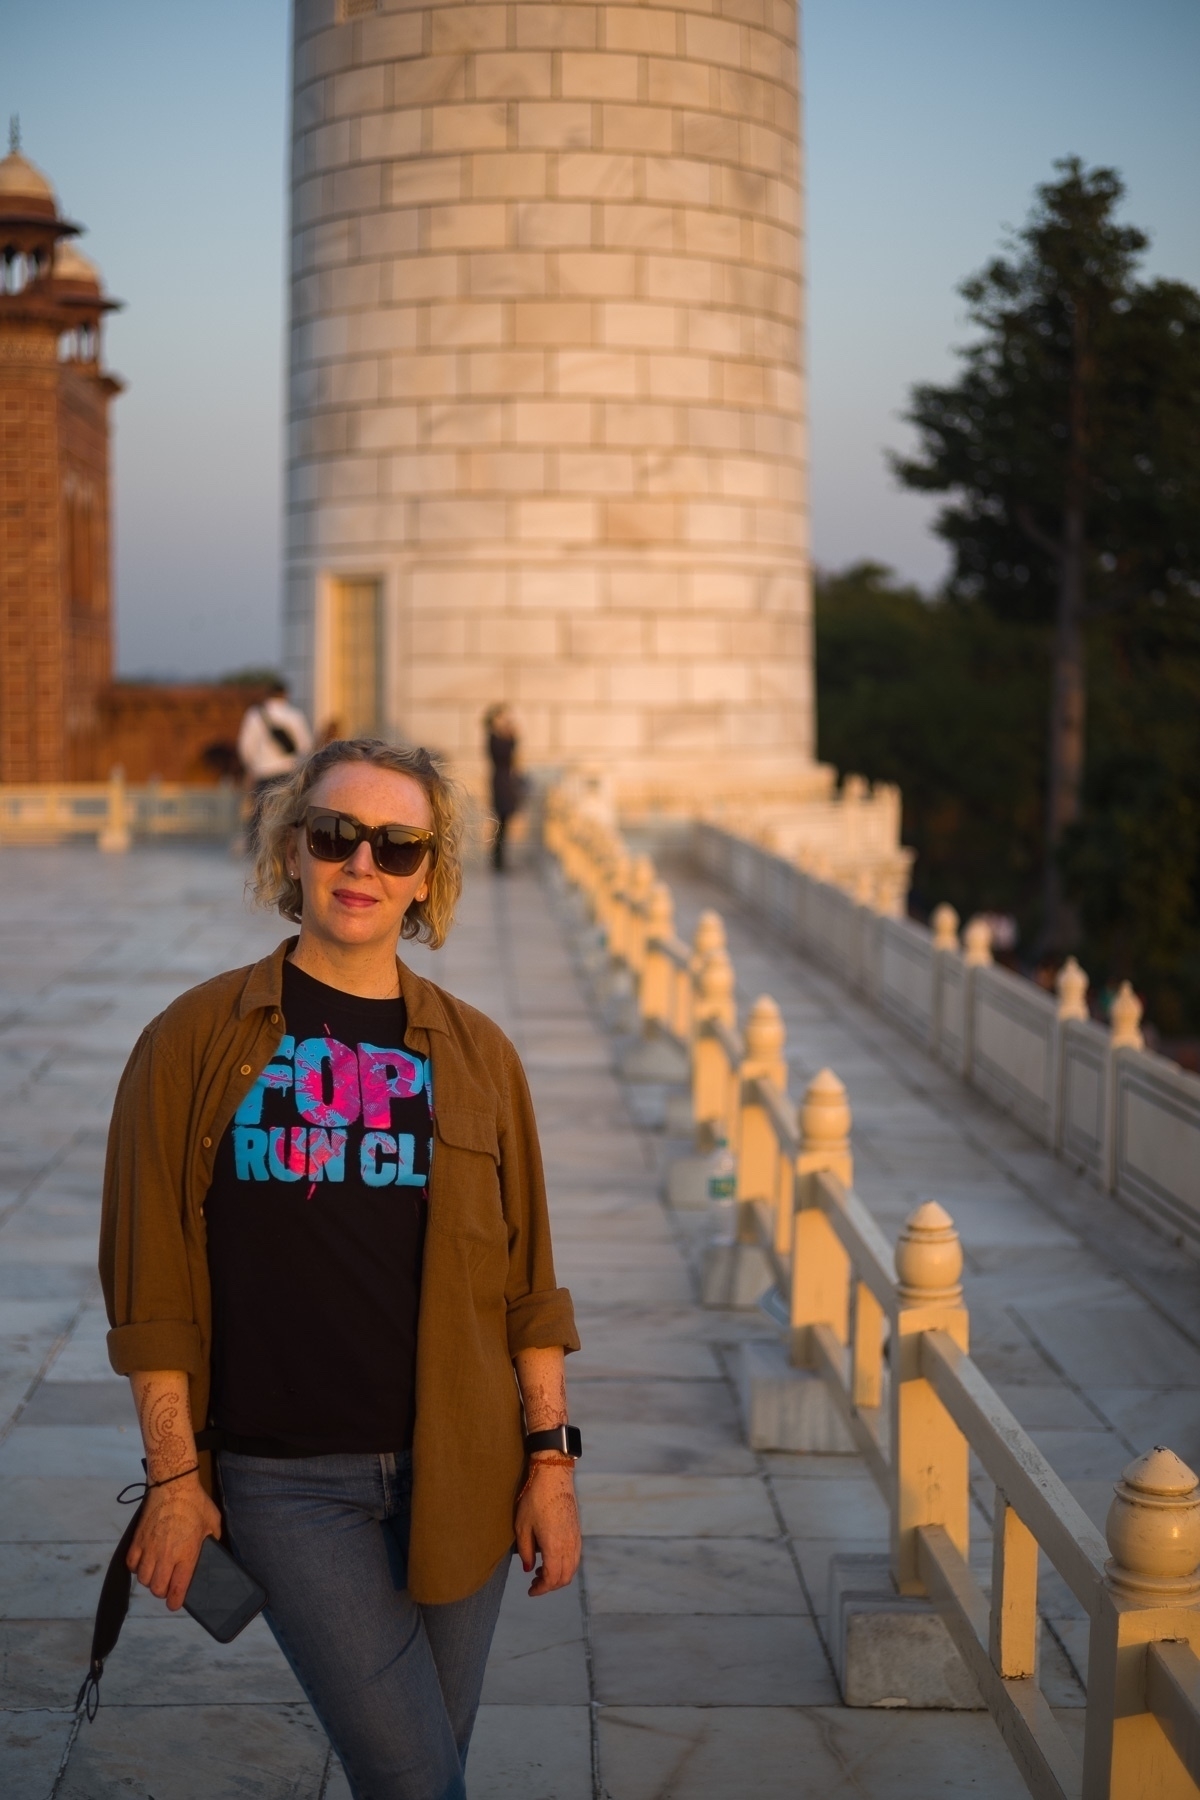 Jenni in front of one of the minars of the Taj Mahal with warm sunset light falling on both.